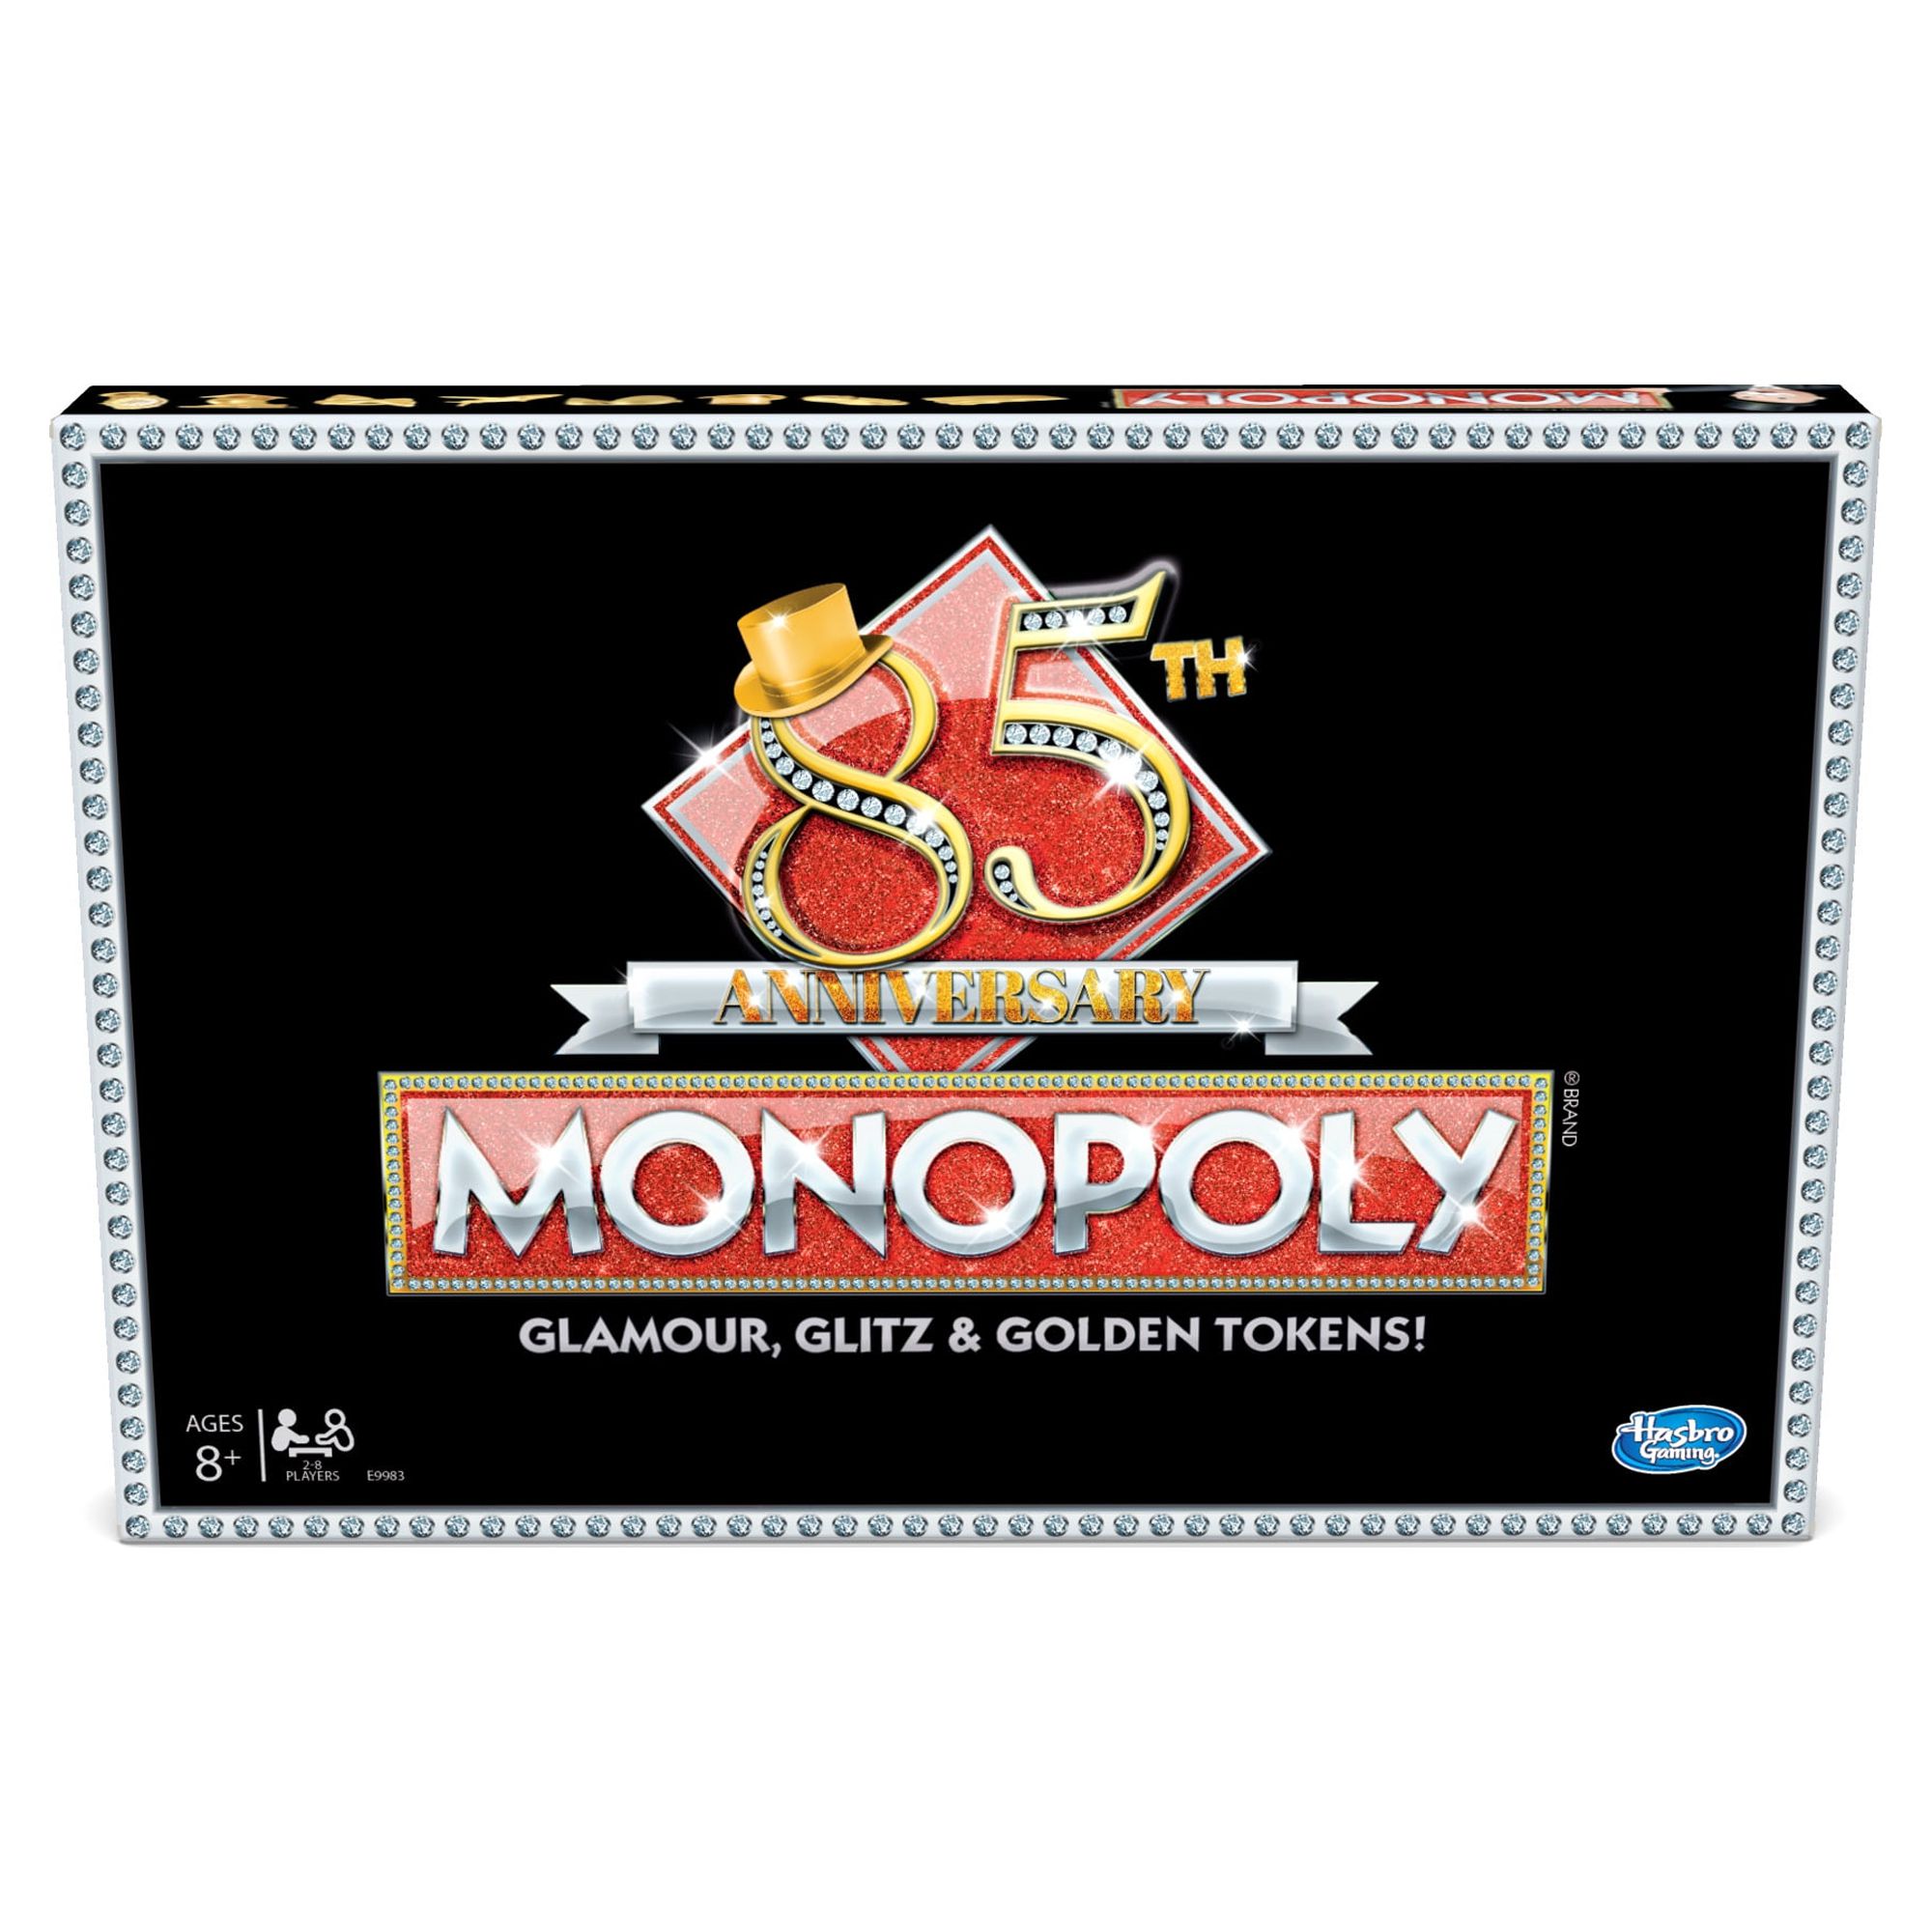 Monopoly 85Th anniversary Game, includes 8 Golden tokens - image 1 of 8